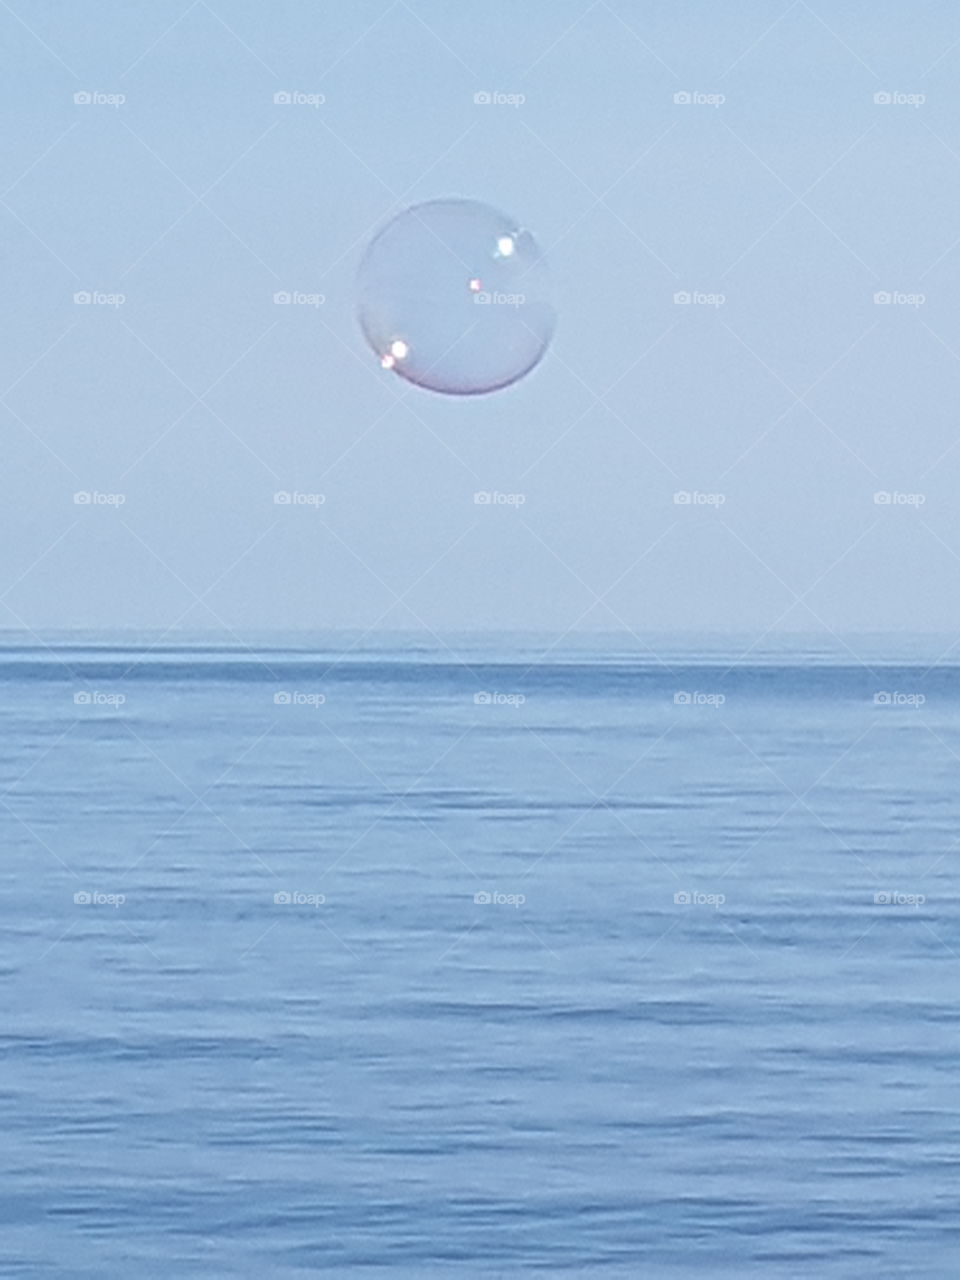 Air, water and bubble